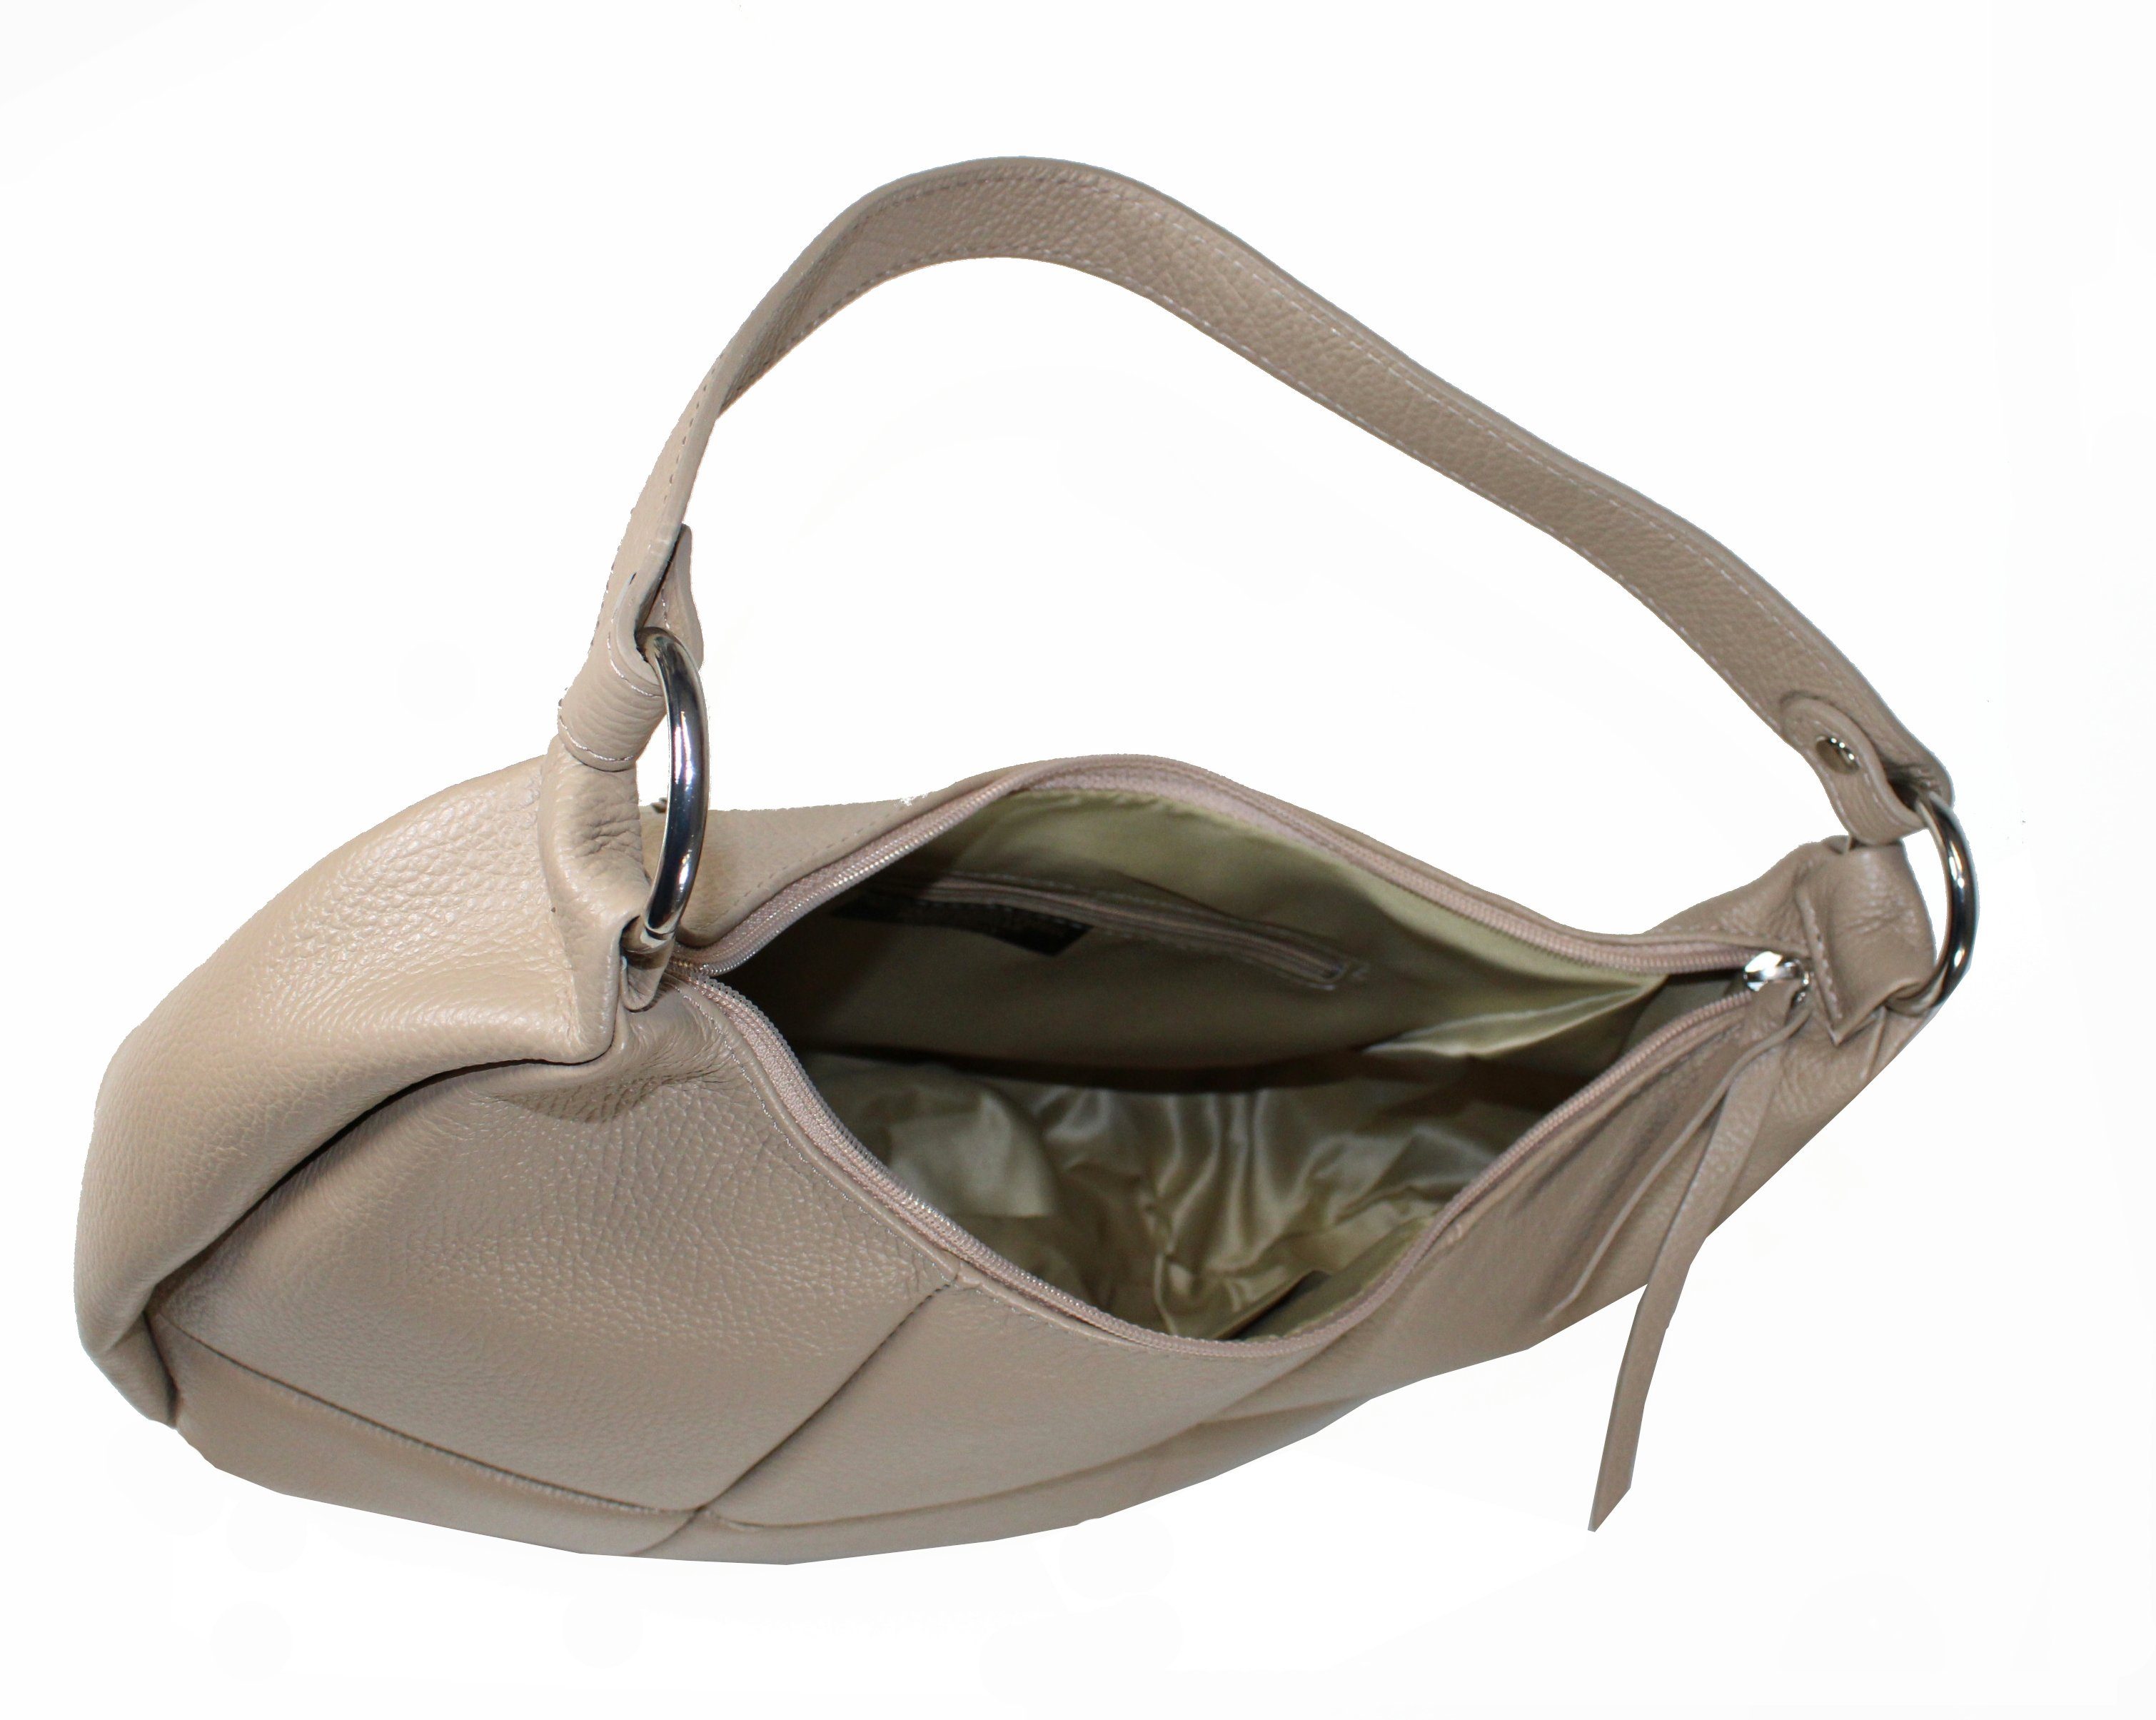 Taupe Made fs-bags in Patchwork Optik, fs7219, Italy Handtasche